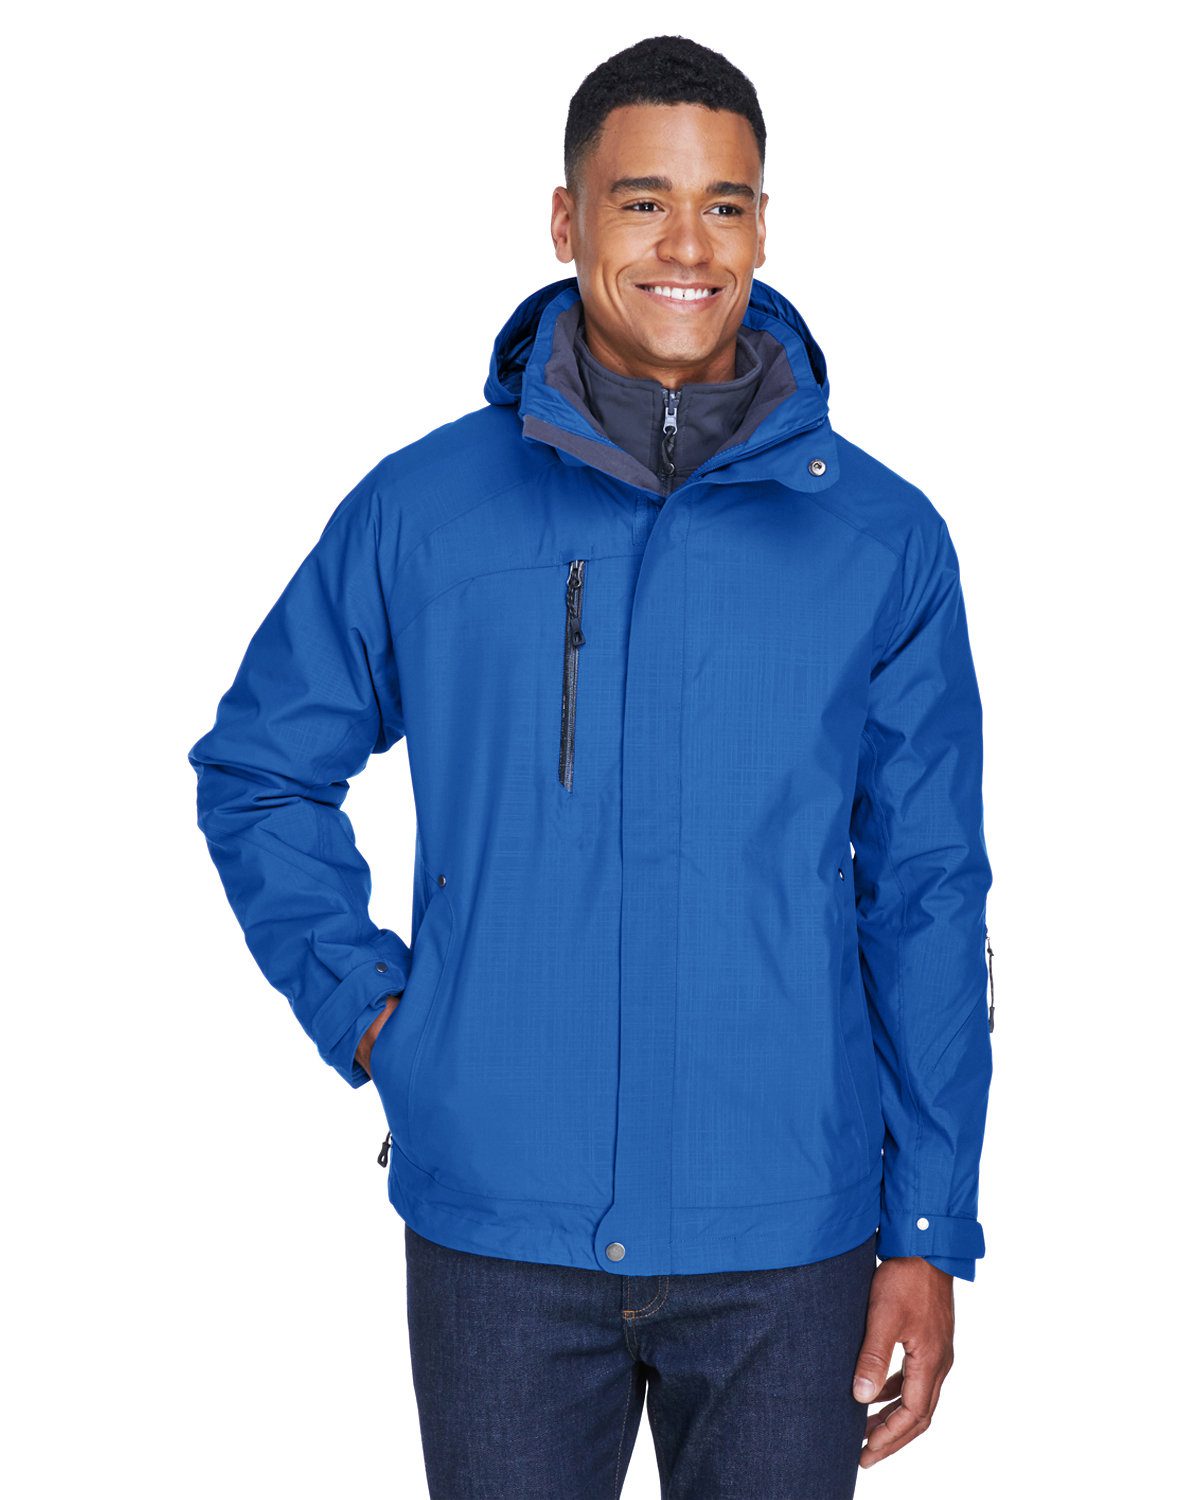 North End Men's Caprice 3-in-1 Jacket with Soft Shell Liner #88178 Royal Blue